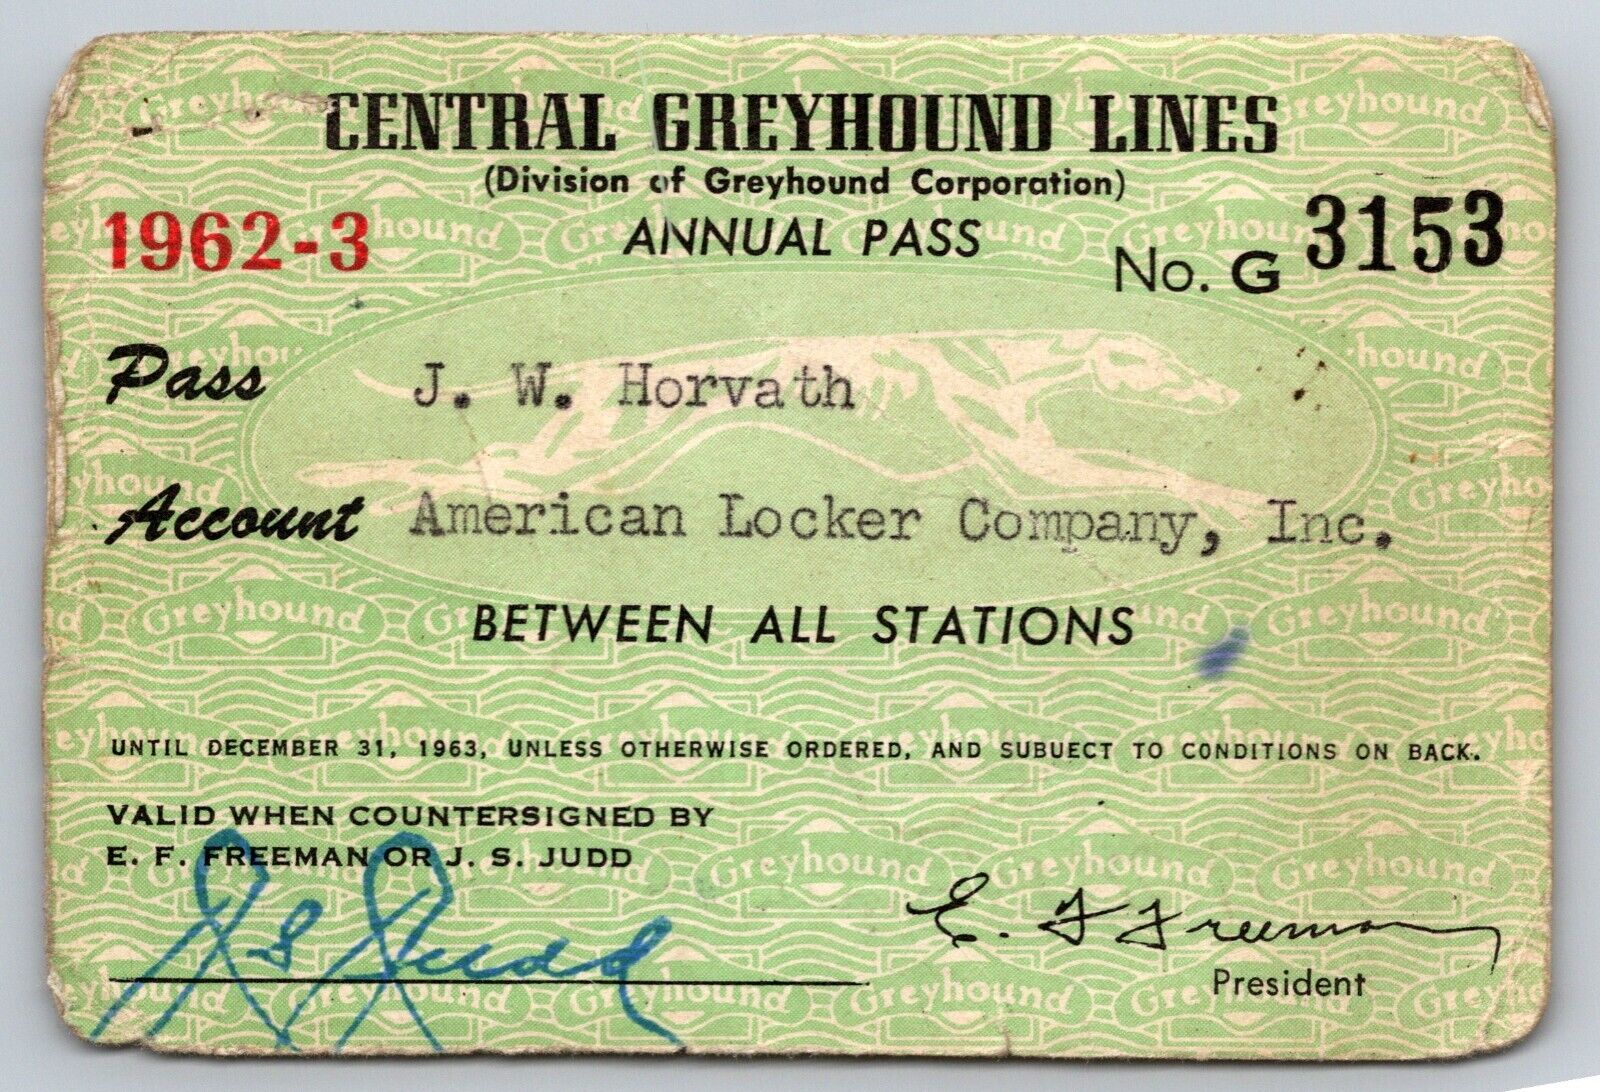 Central Greyhound Lines 1962-63 Annual / Yearly Bus Pass #3153